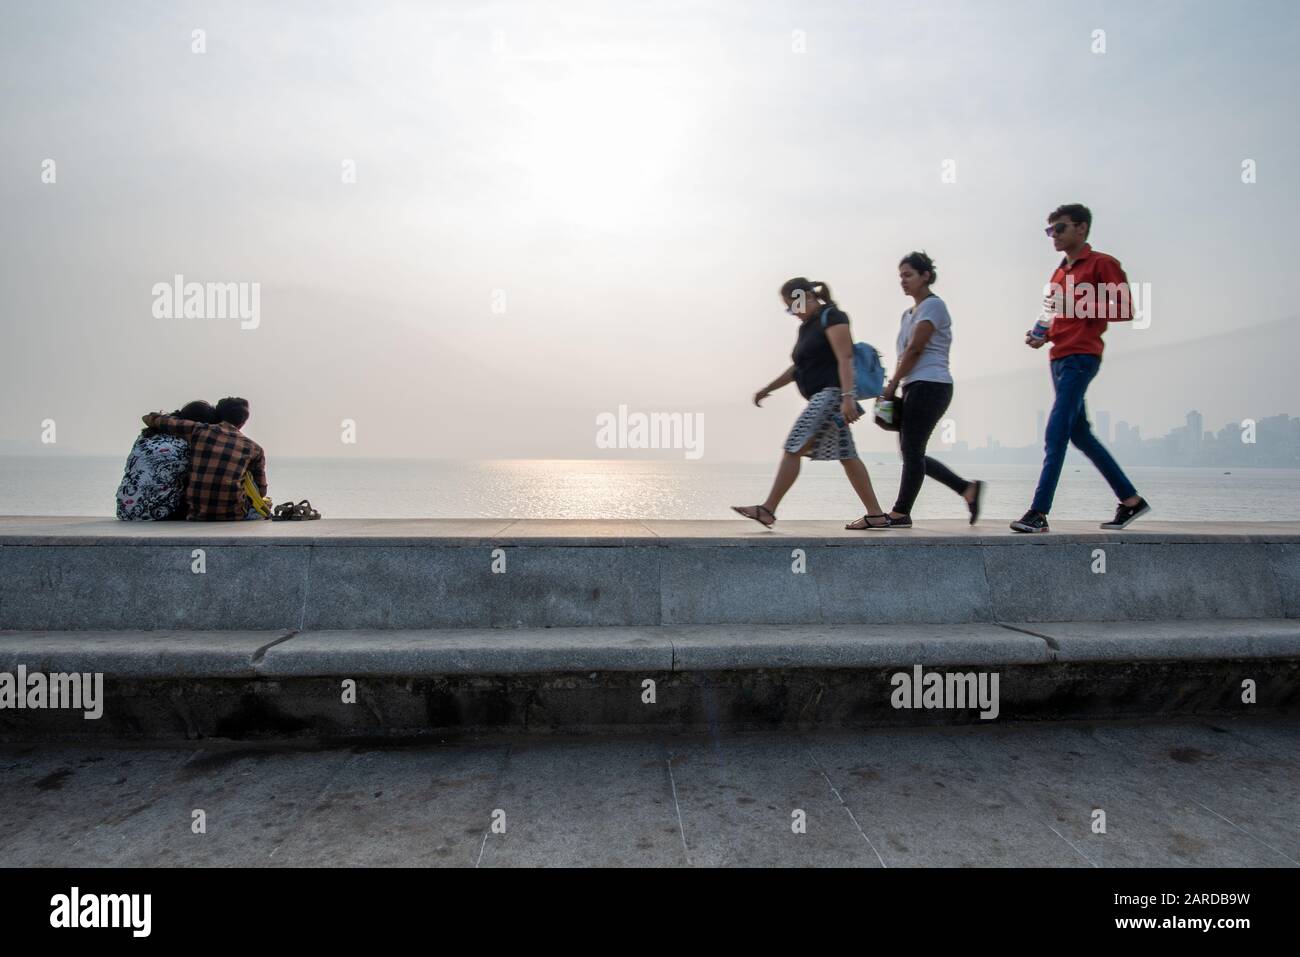 Mumbai, India - December 15, 2017: Lovers on Marine Drive with three passersby, taken at the end of the afternoon Stock Photo